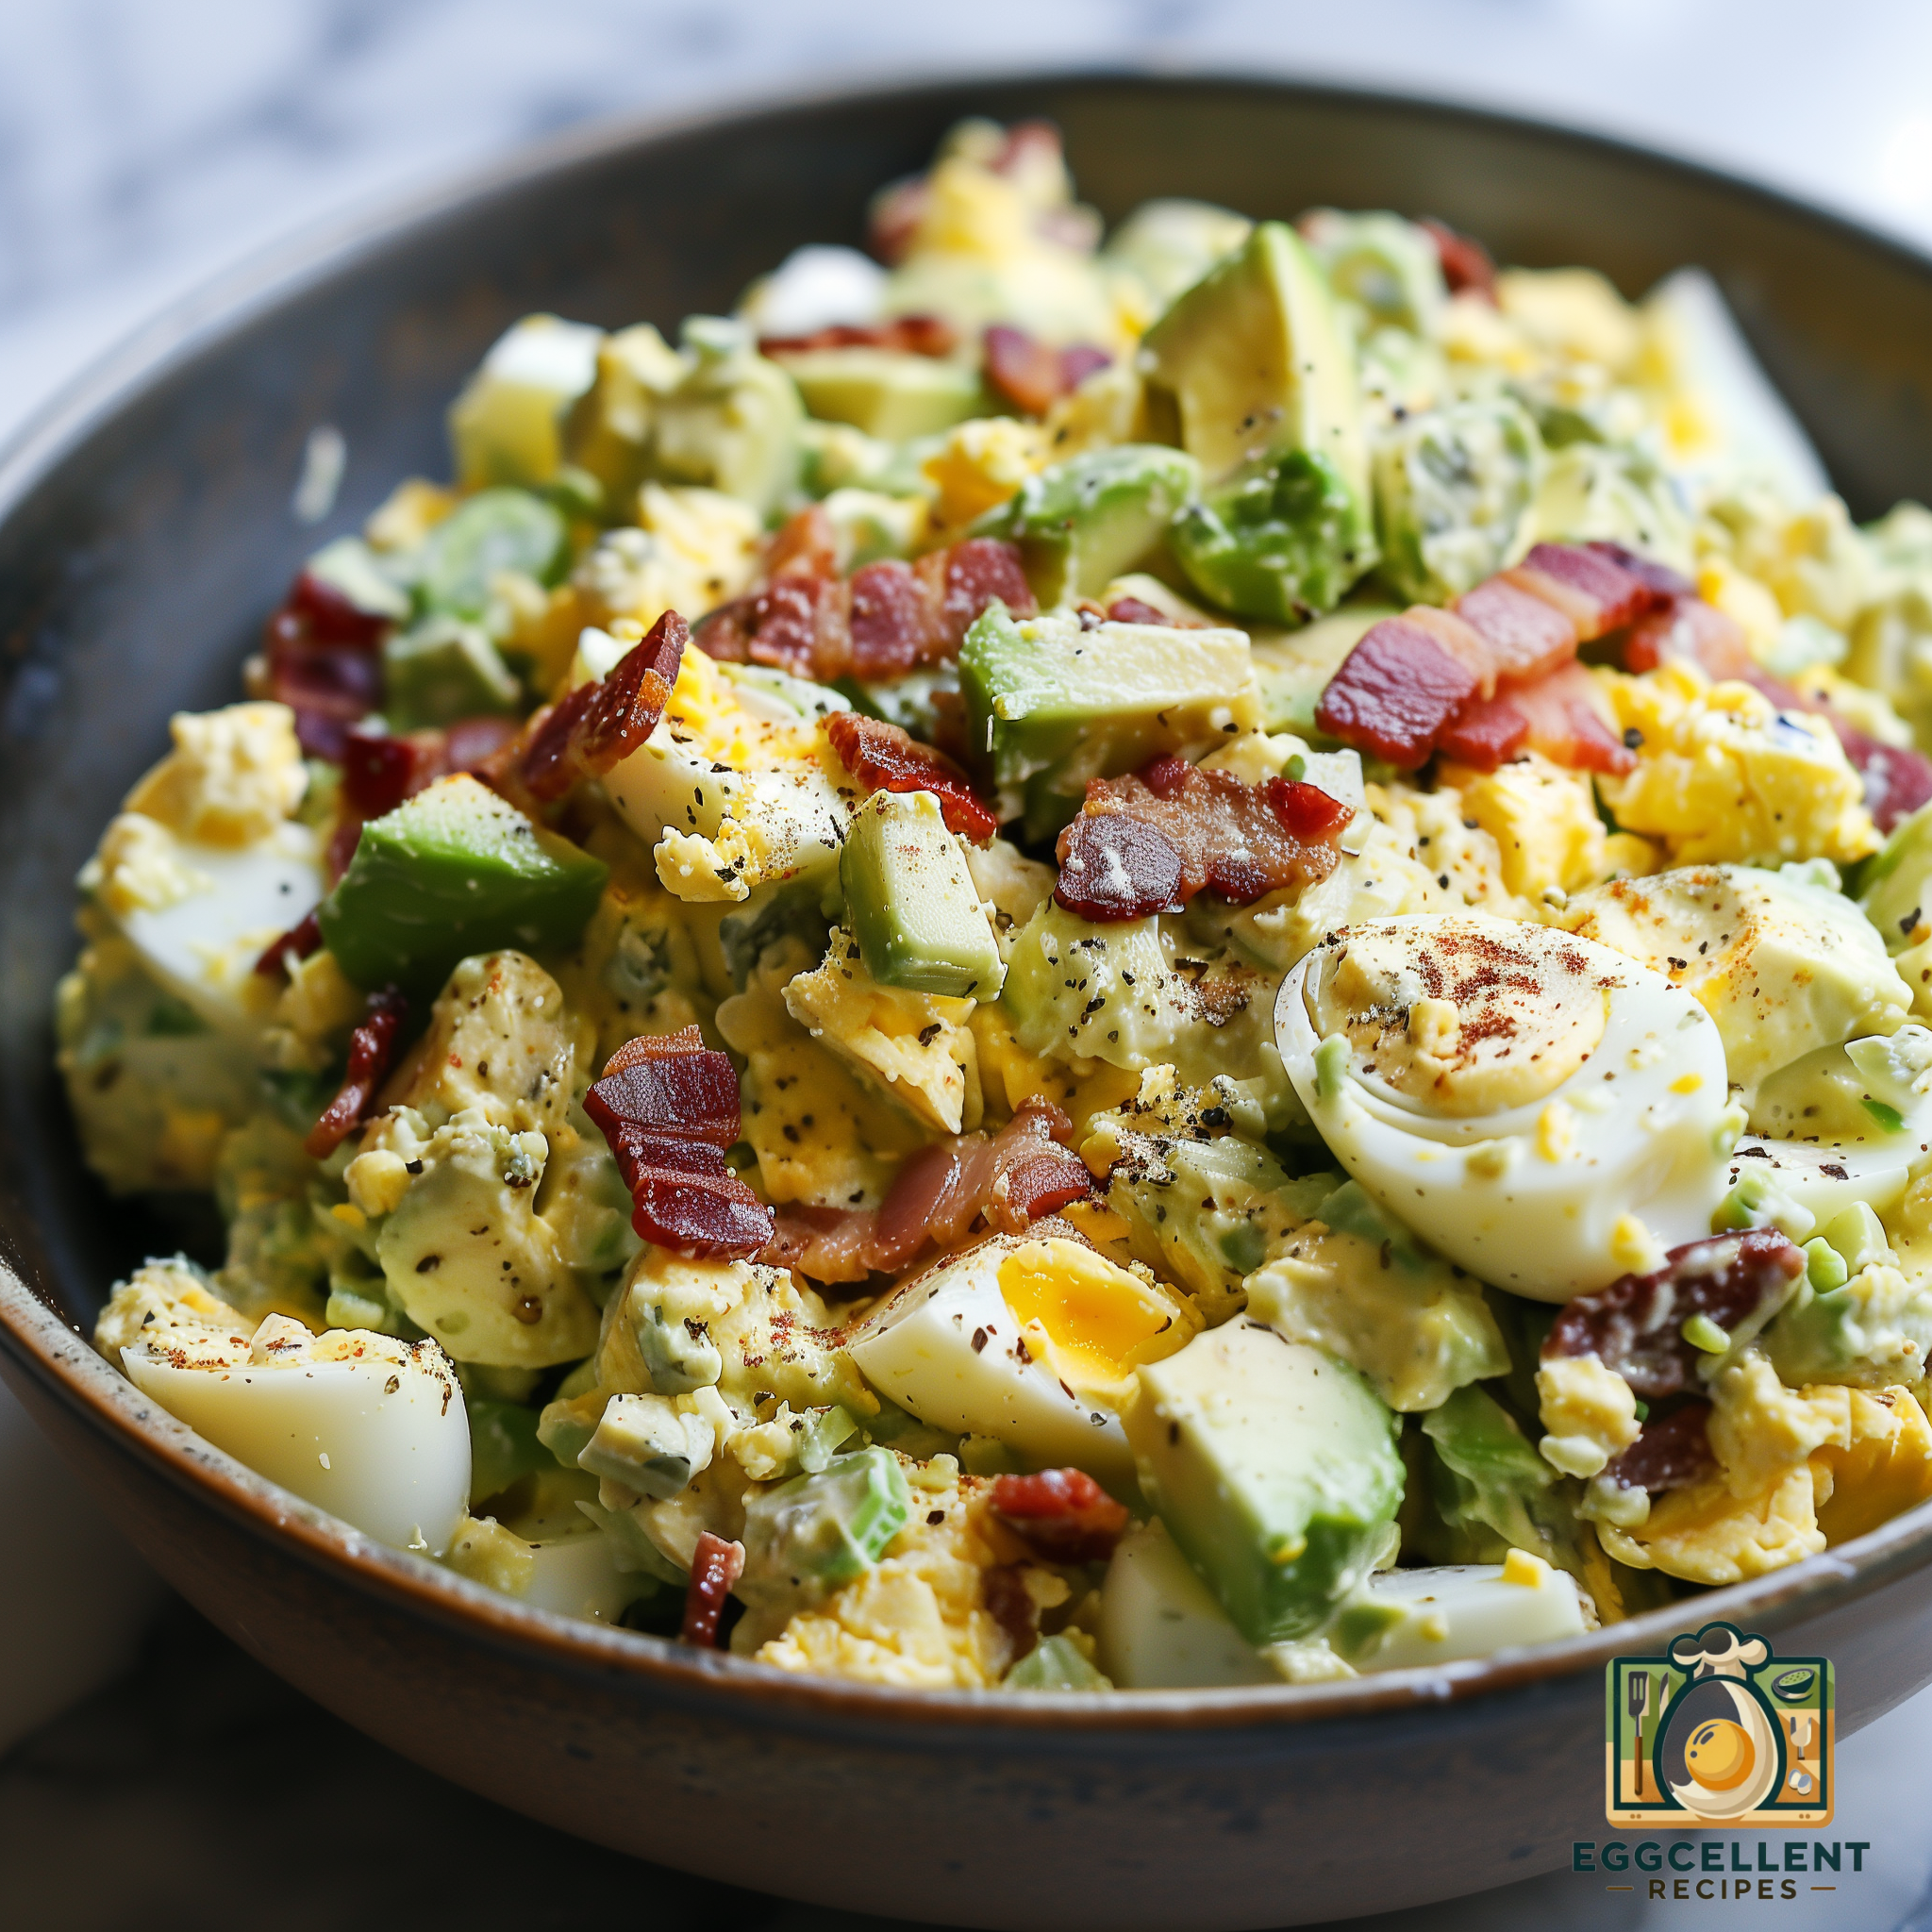 Egg Salad with Avocado, Bacon, and Ranch Dressing Recipe